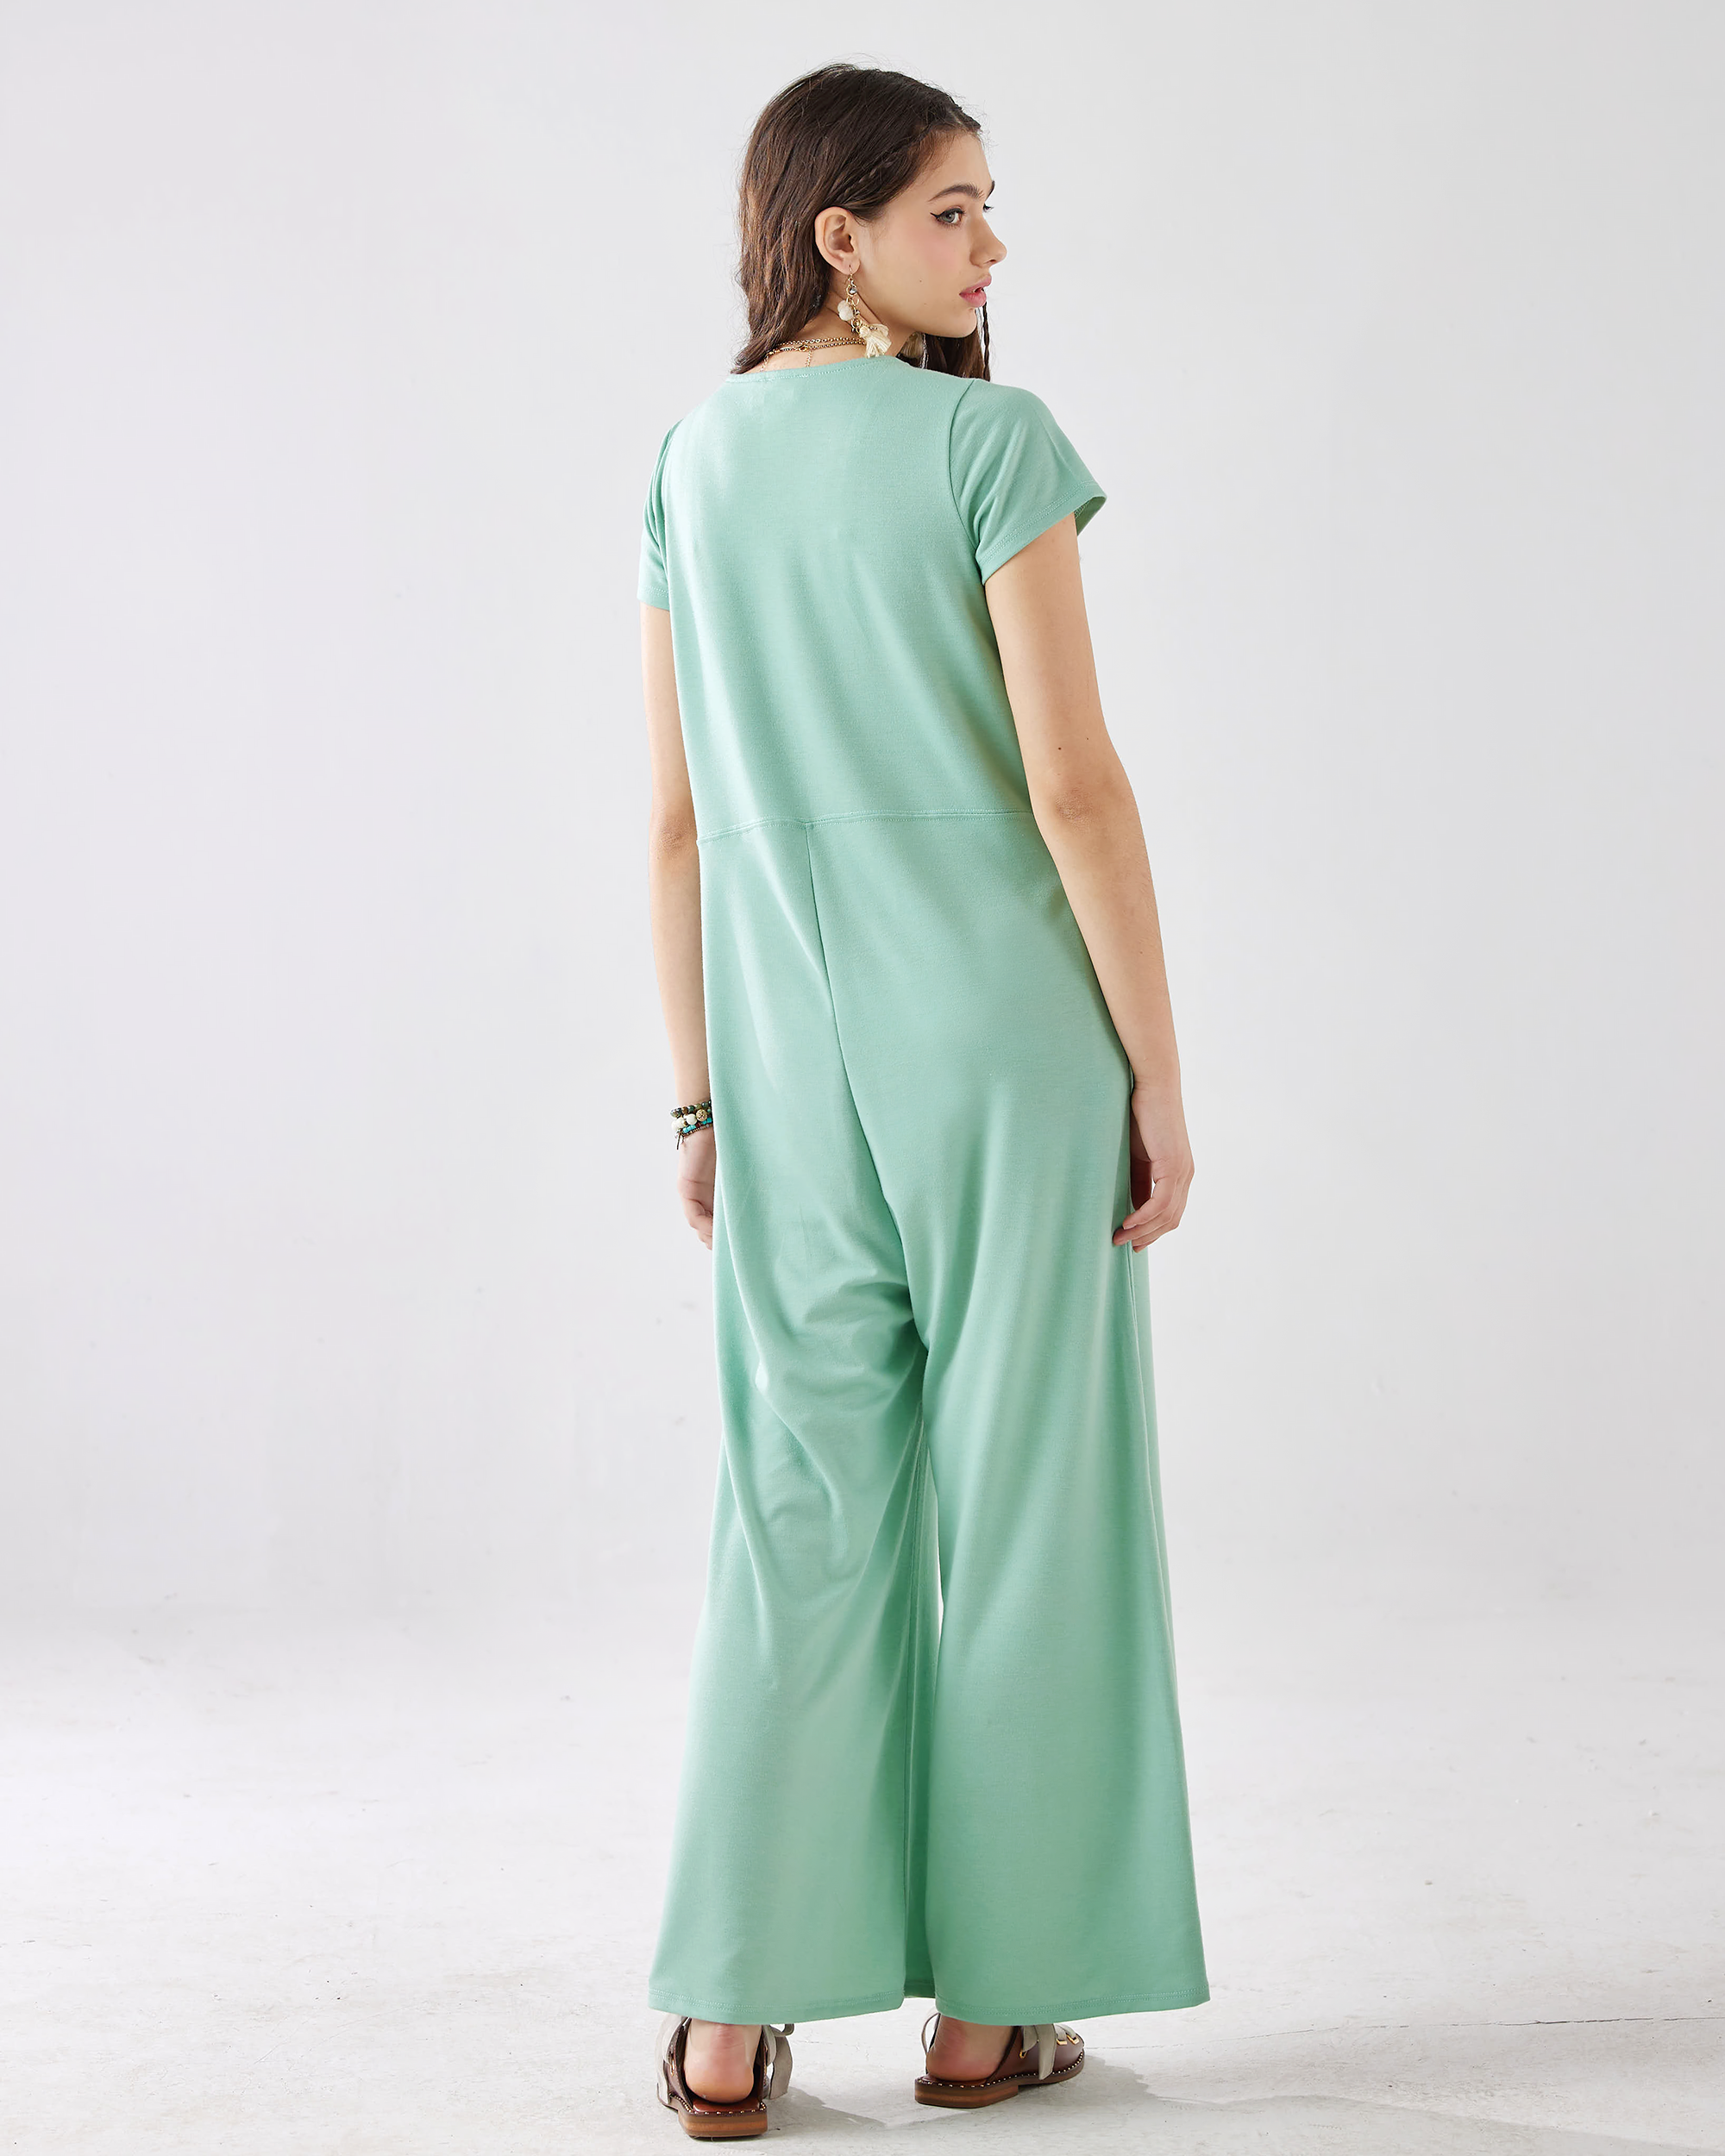 Washed Mint Jumpsuit: Fresh Button-Up Style